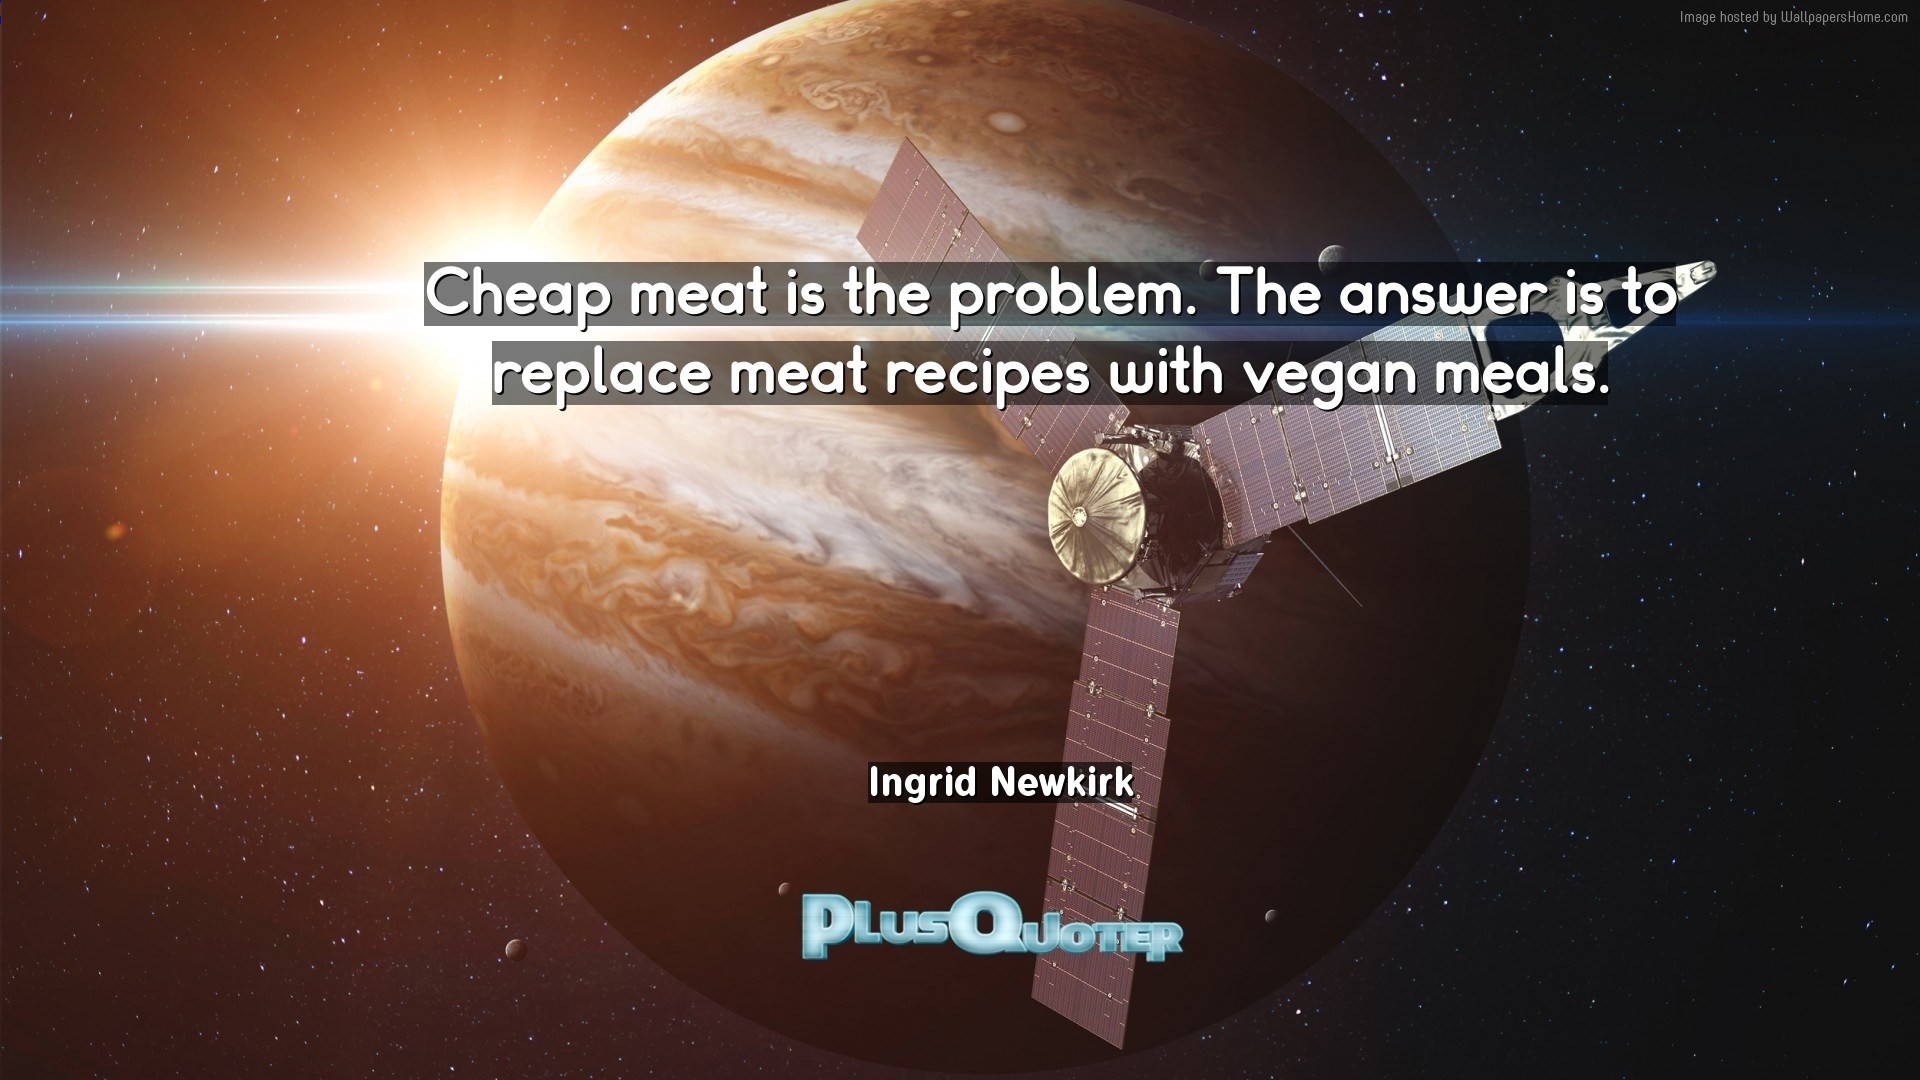 1920x1080 Download Wallpaper with inspirational Quotes- "Cheap meat is the problem.  The answer is